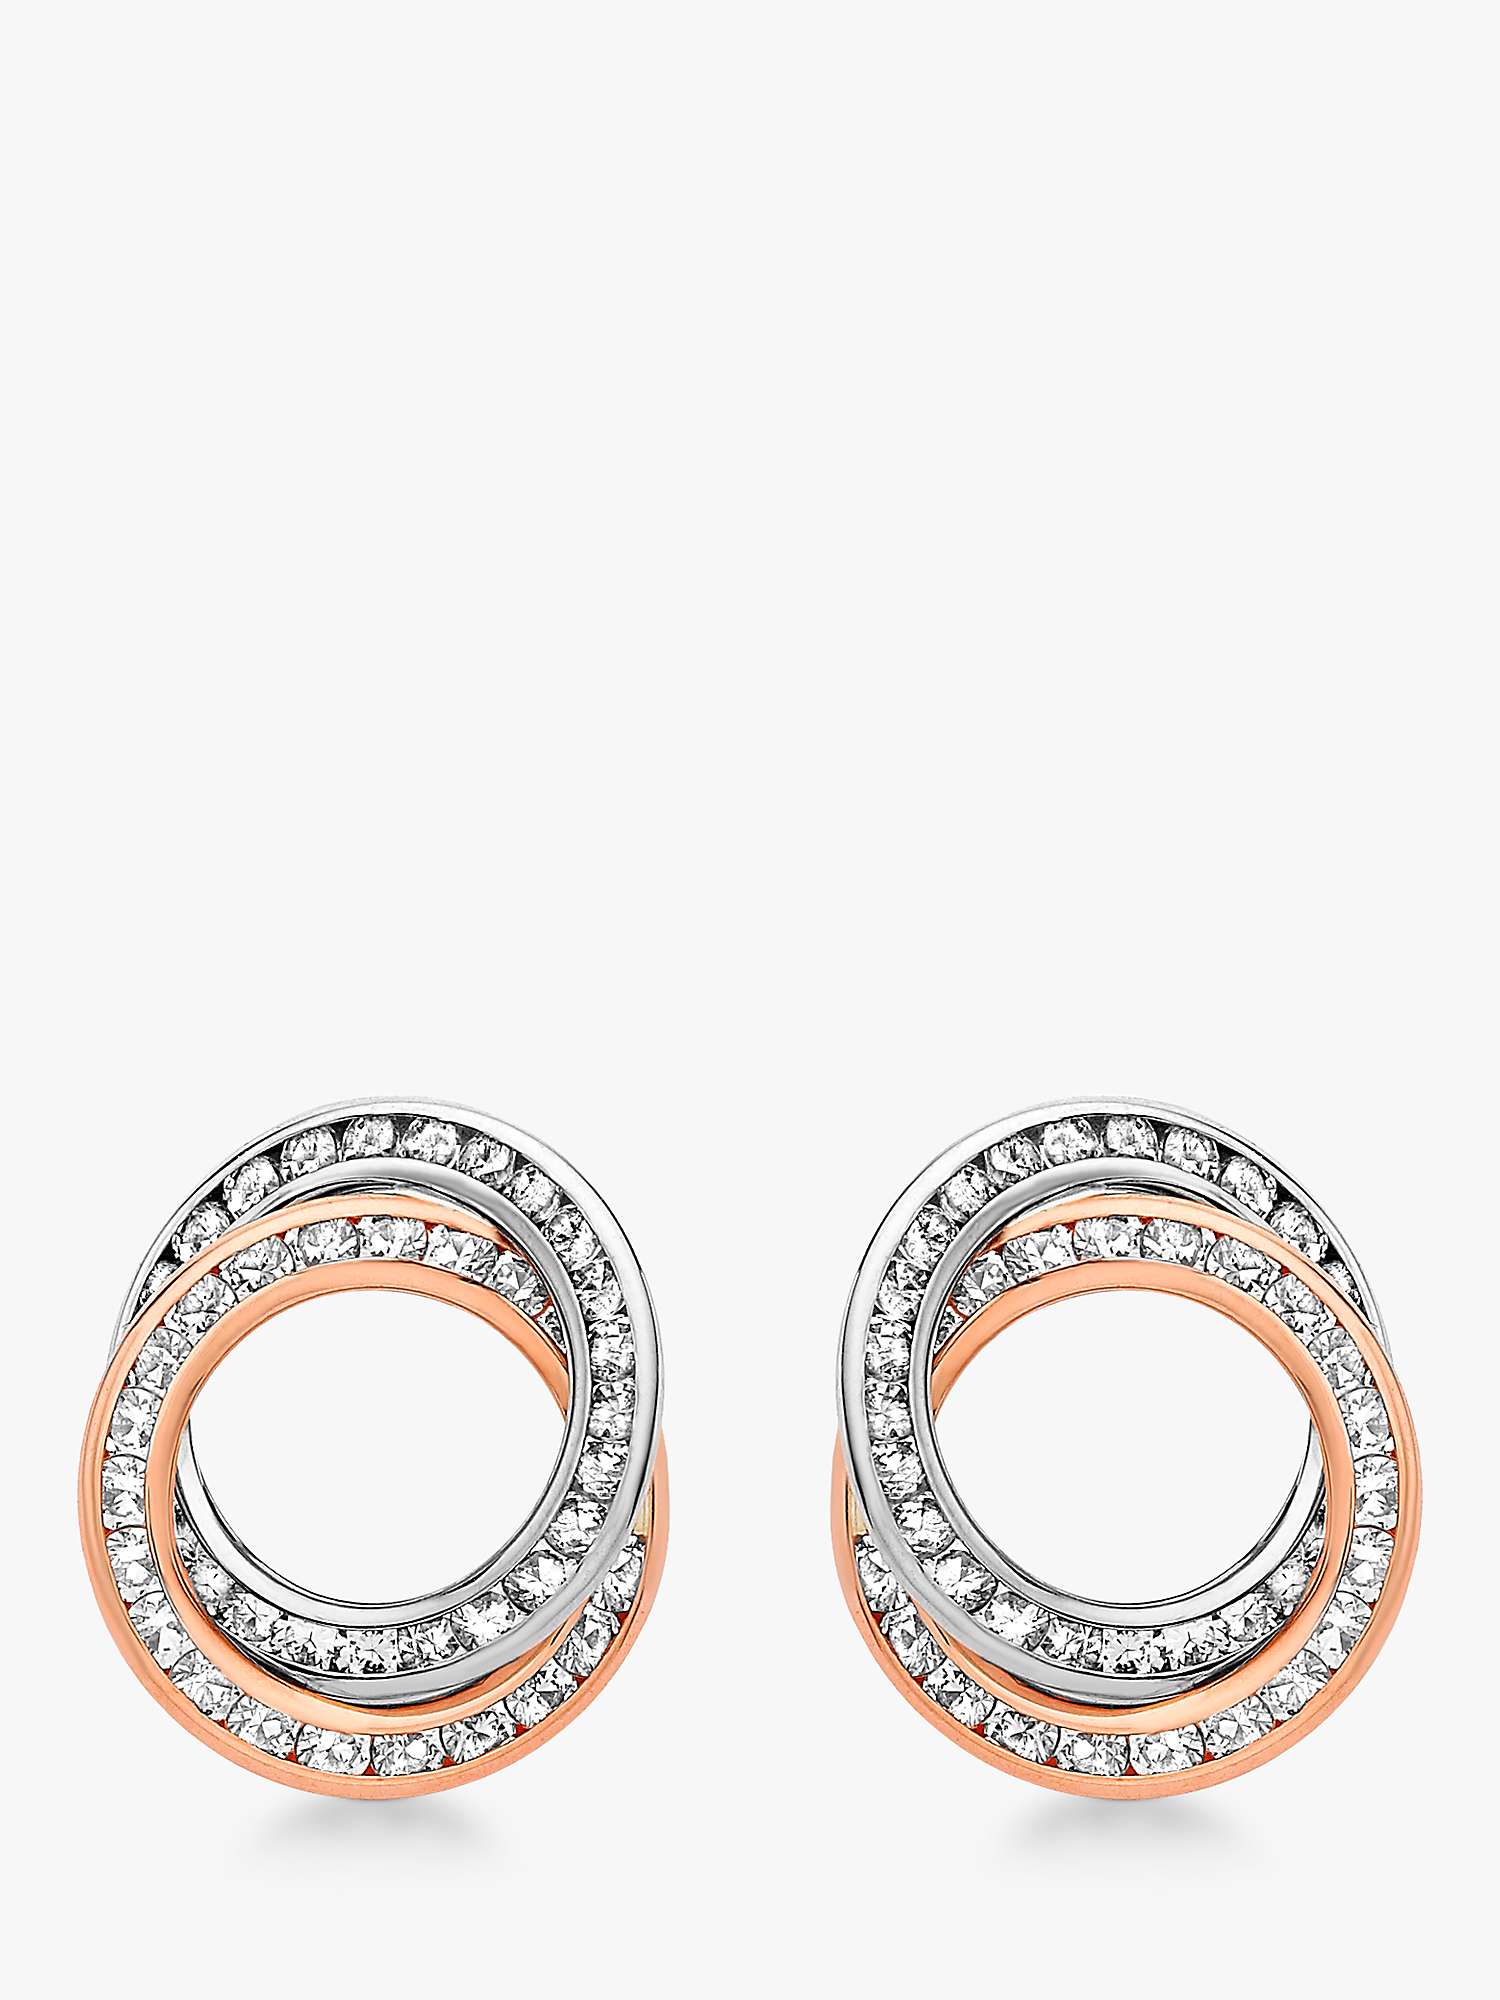 Buy IBB 9ct Two Colour Gold Cubic Zirconia Linked Ring Stud Earrings, White/Rose Gold Online at johnlewis.com